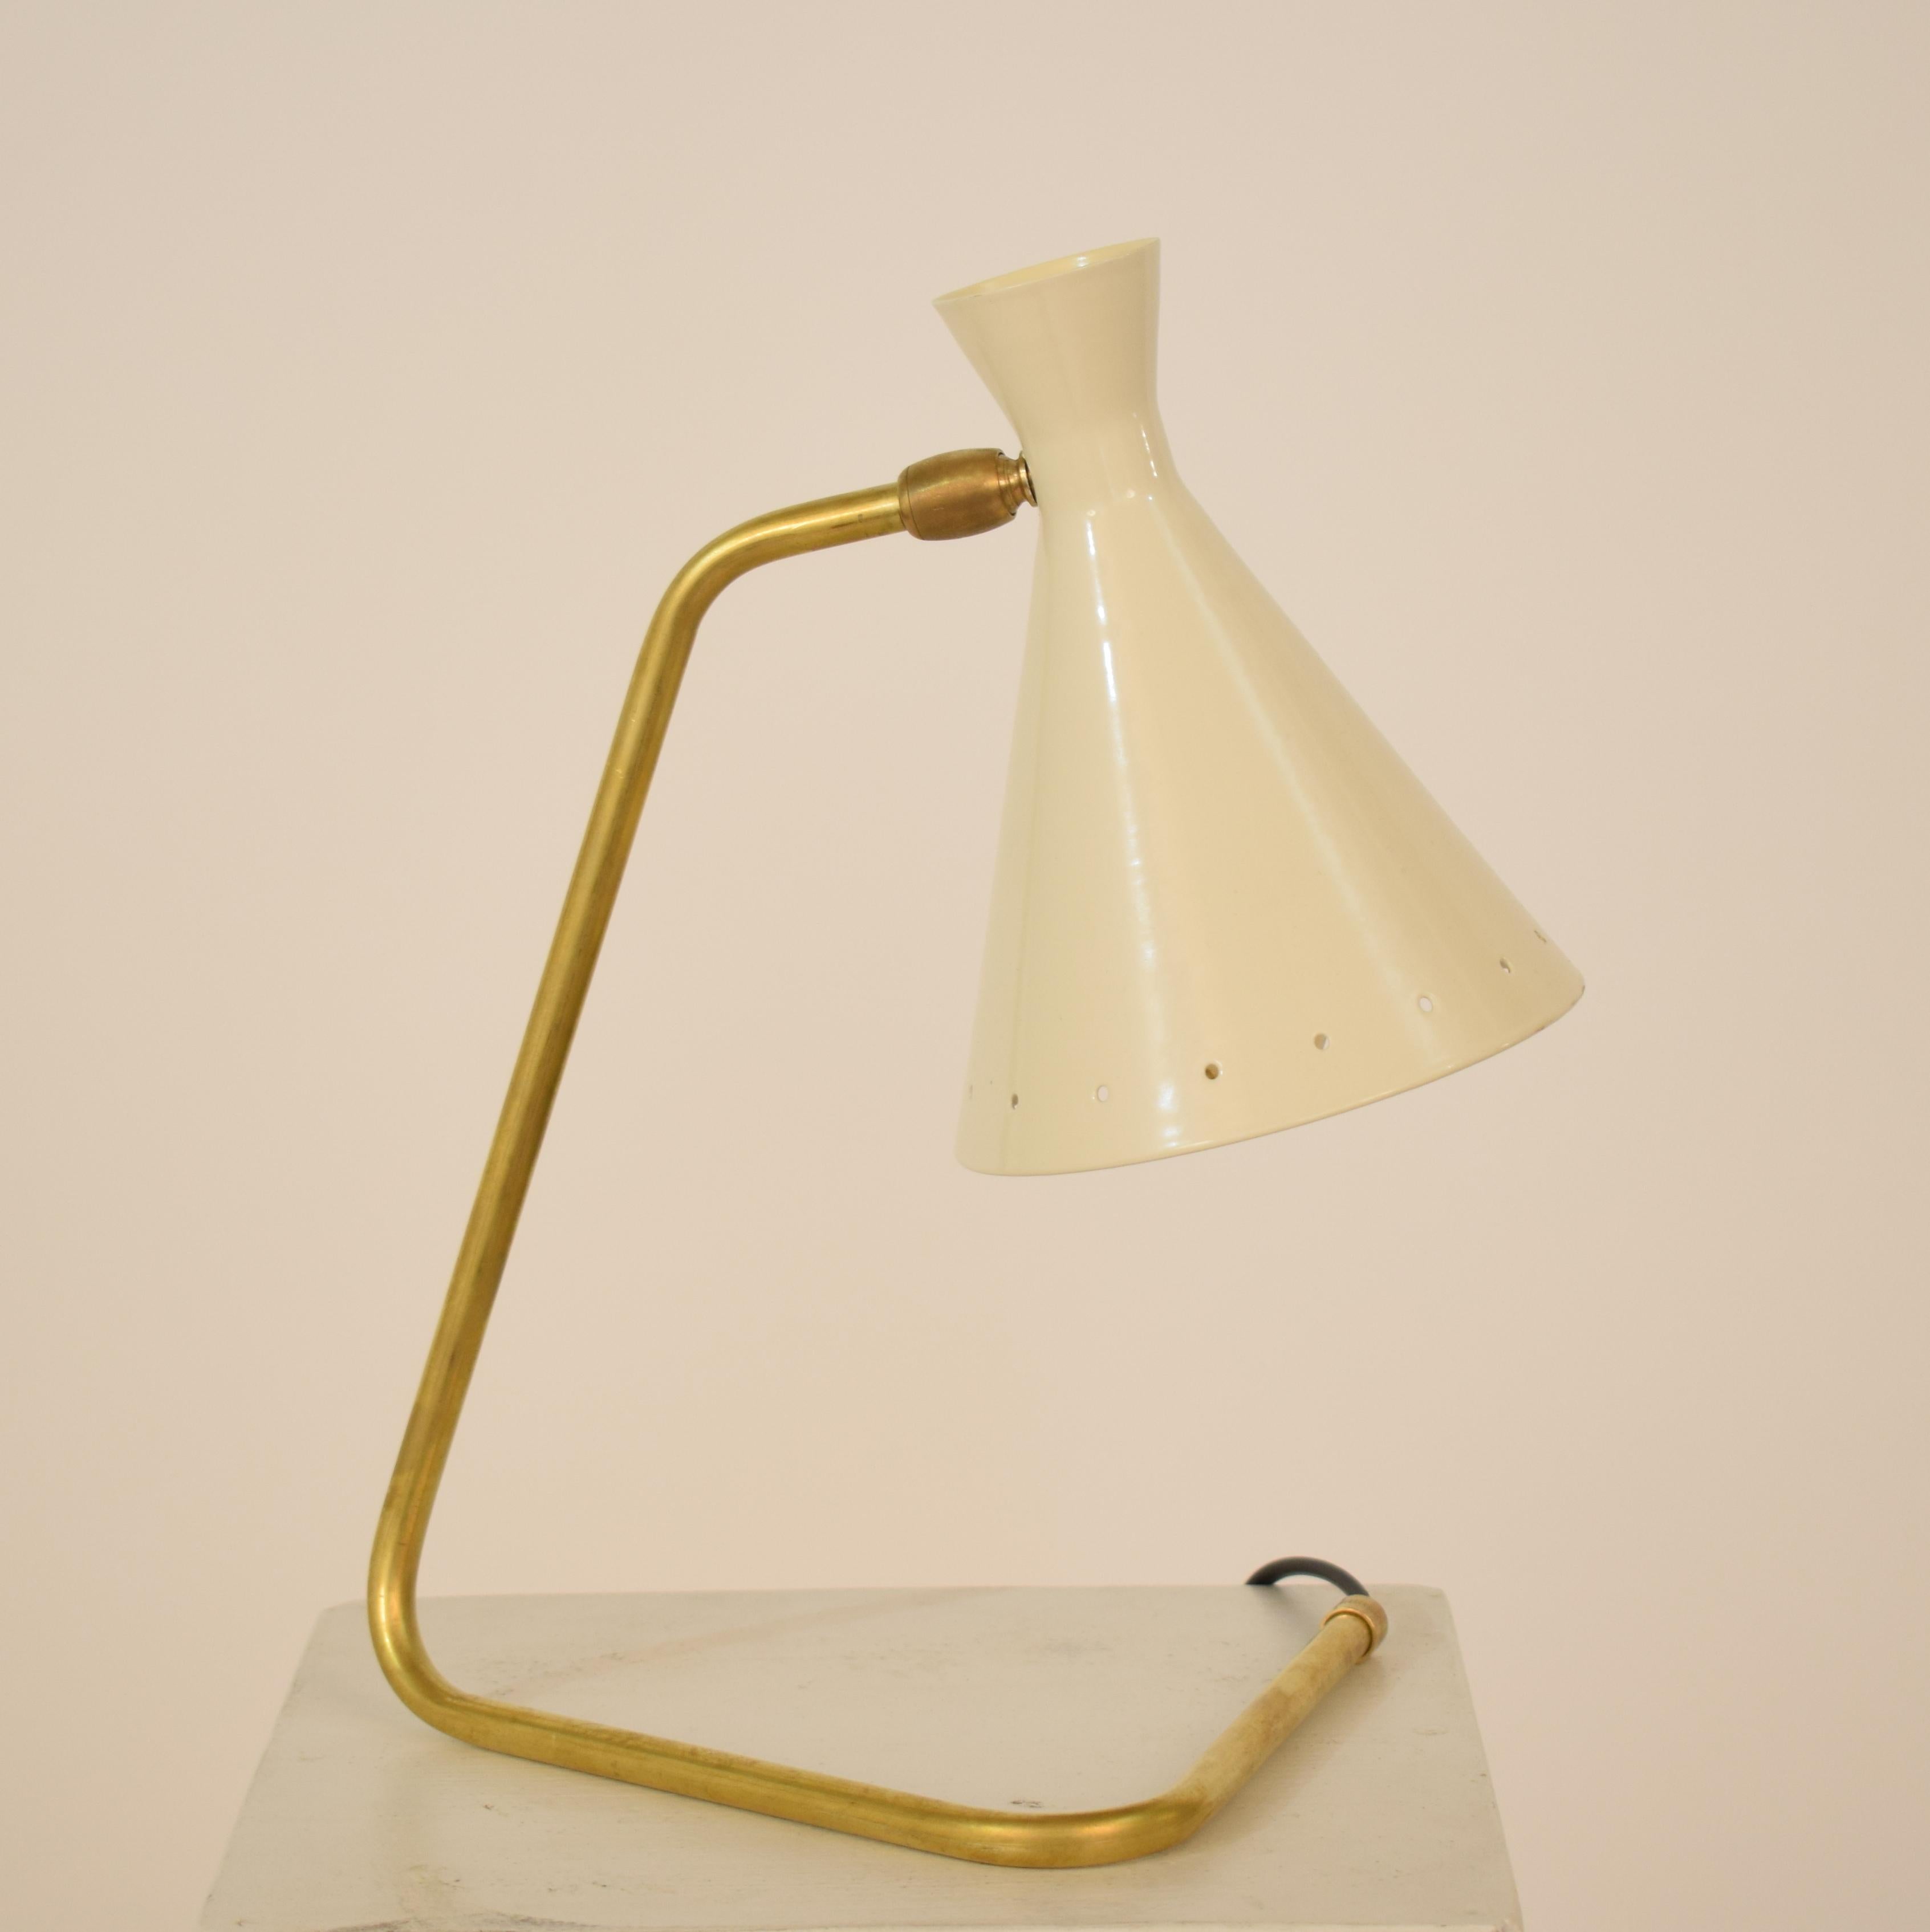 The beautiful modern small table Lamp in brass and lacquered metal is made in the style of Stilnovo.

A beautiful  piece which is a great eye-catcher for your antique, modern, space age or mid-century interior.
If you have any more questions we are